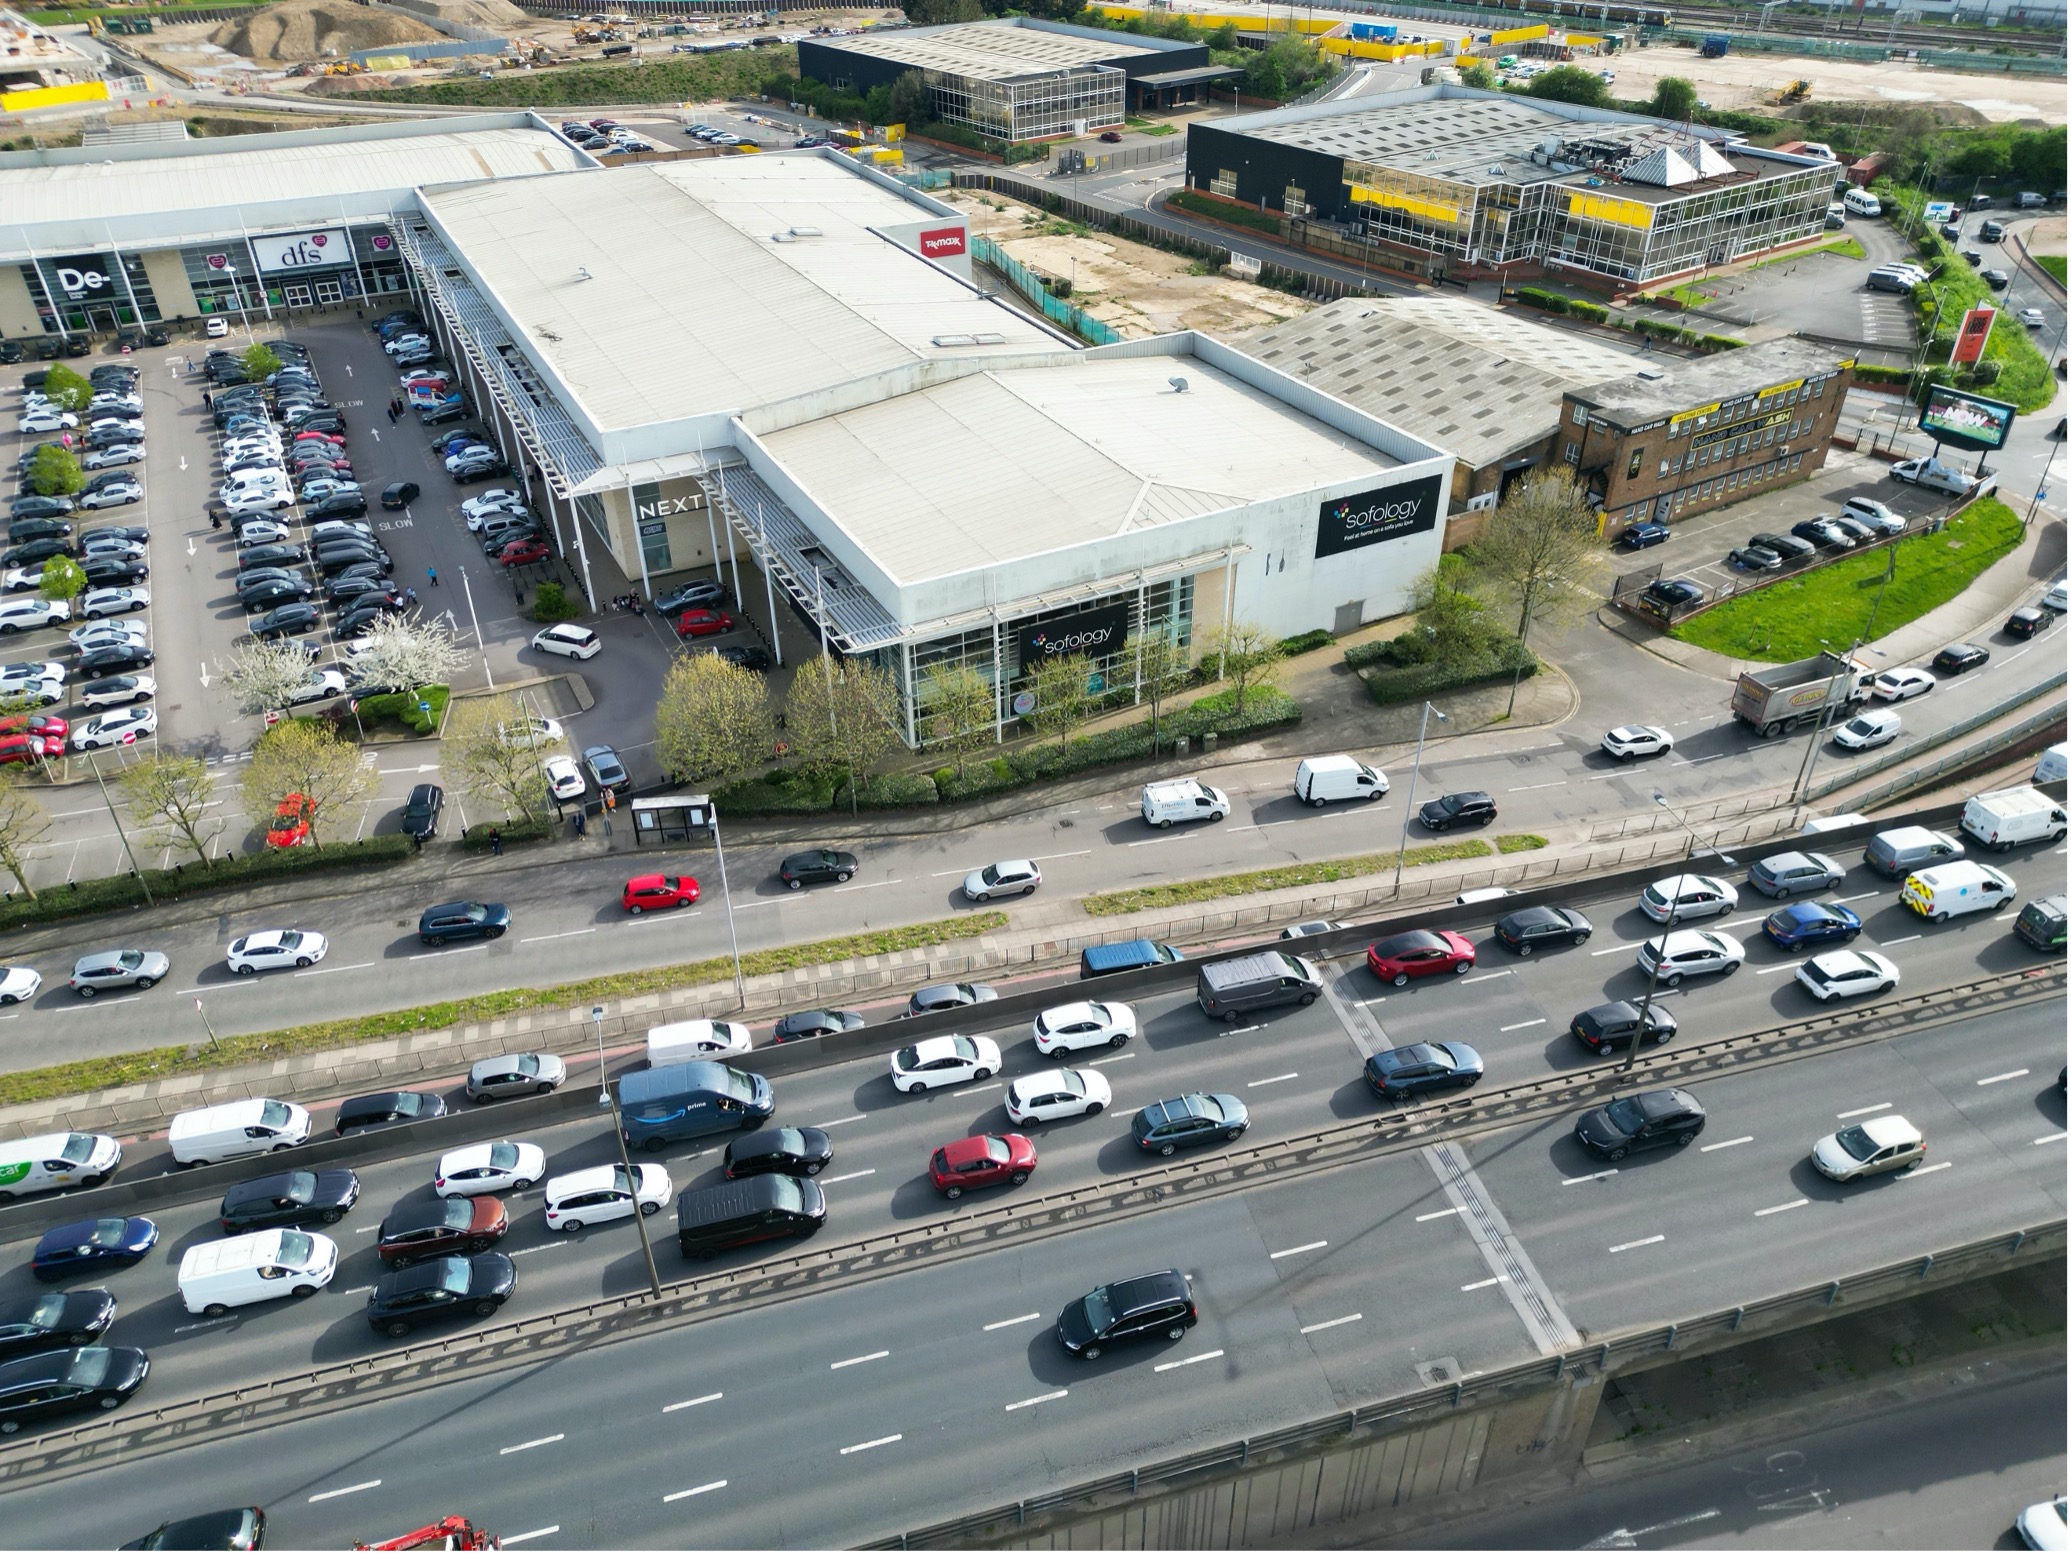 PTSG to supply wet risers in Brent Cross Town